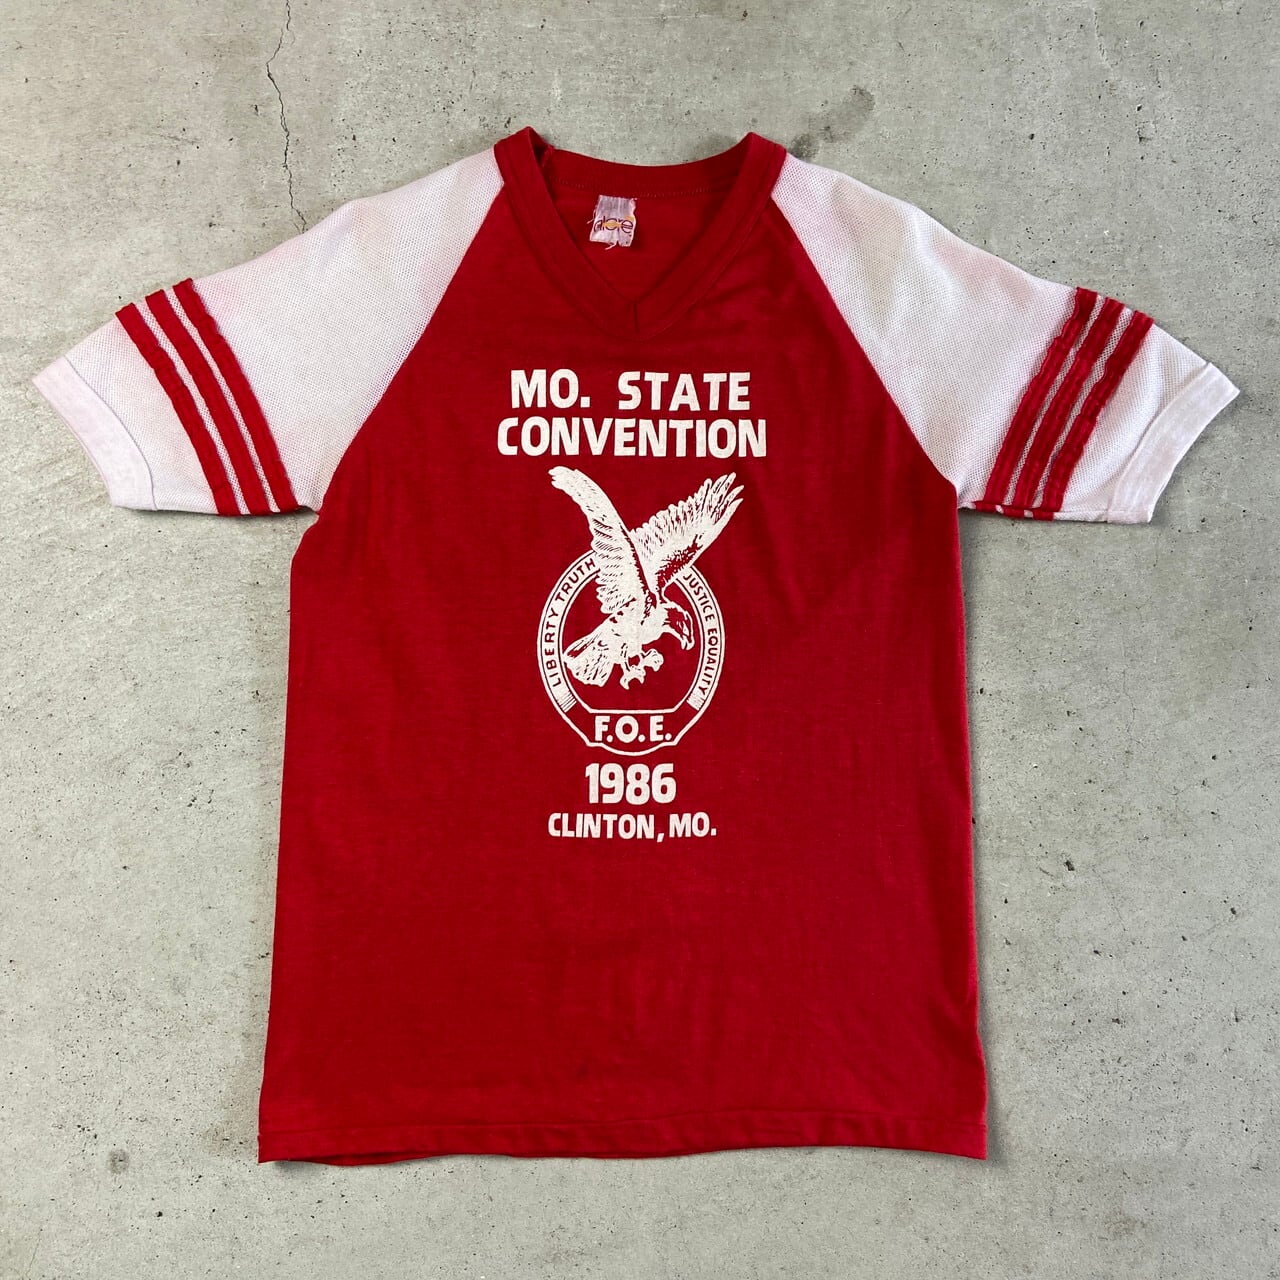 USA製 80年代 mo.state convention メッシュ切替 ラグラン Vネック プリントTシャツ メンズM 古着 80s ヴィンテージ  ビンテージ レッド 赤 レディース【Tシャツ】【SS2308-1】 | cave 古着屋【公式】古着通販サイト powered by BASE